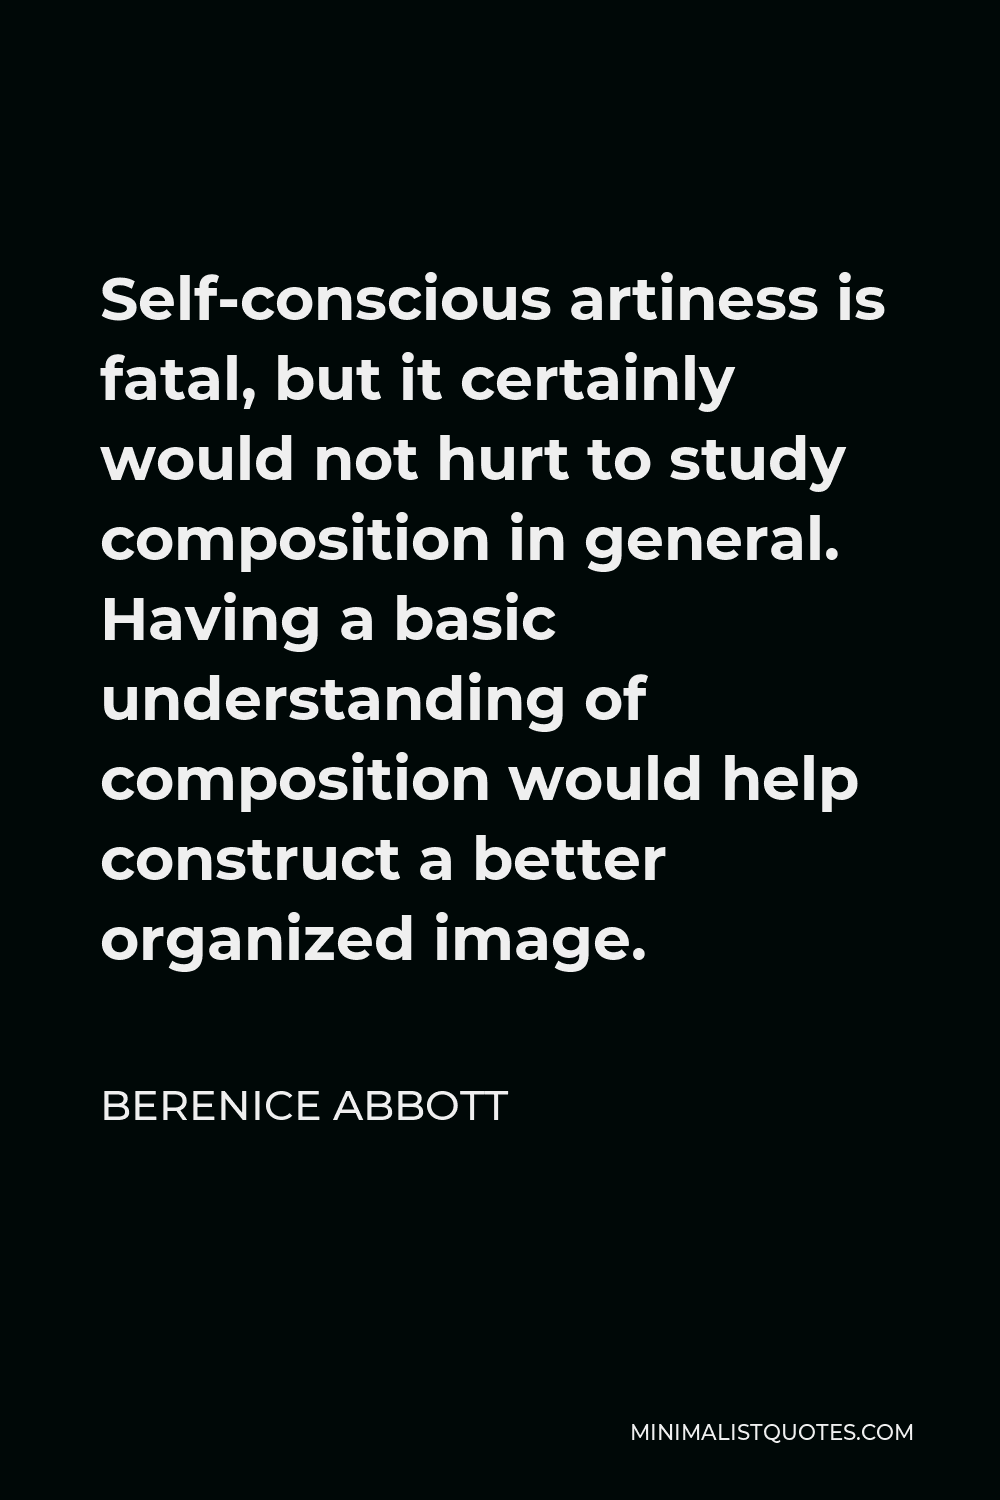 Berenice Abbott Quote - Self-conscious artiness is fatal, but it certainly would not hurt to study composition in general. Having a basic understanding of composition would help construct a better organized image.